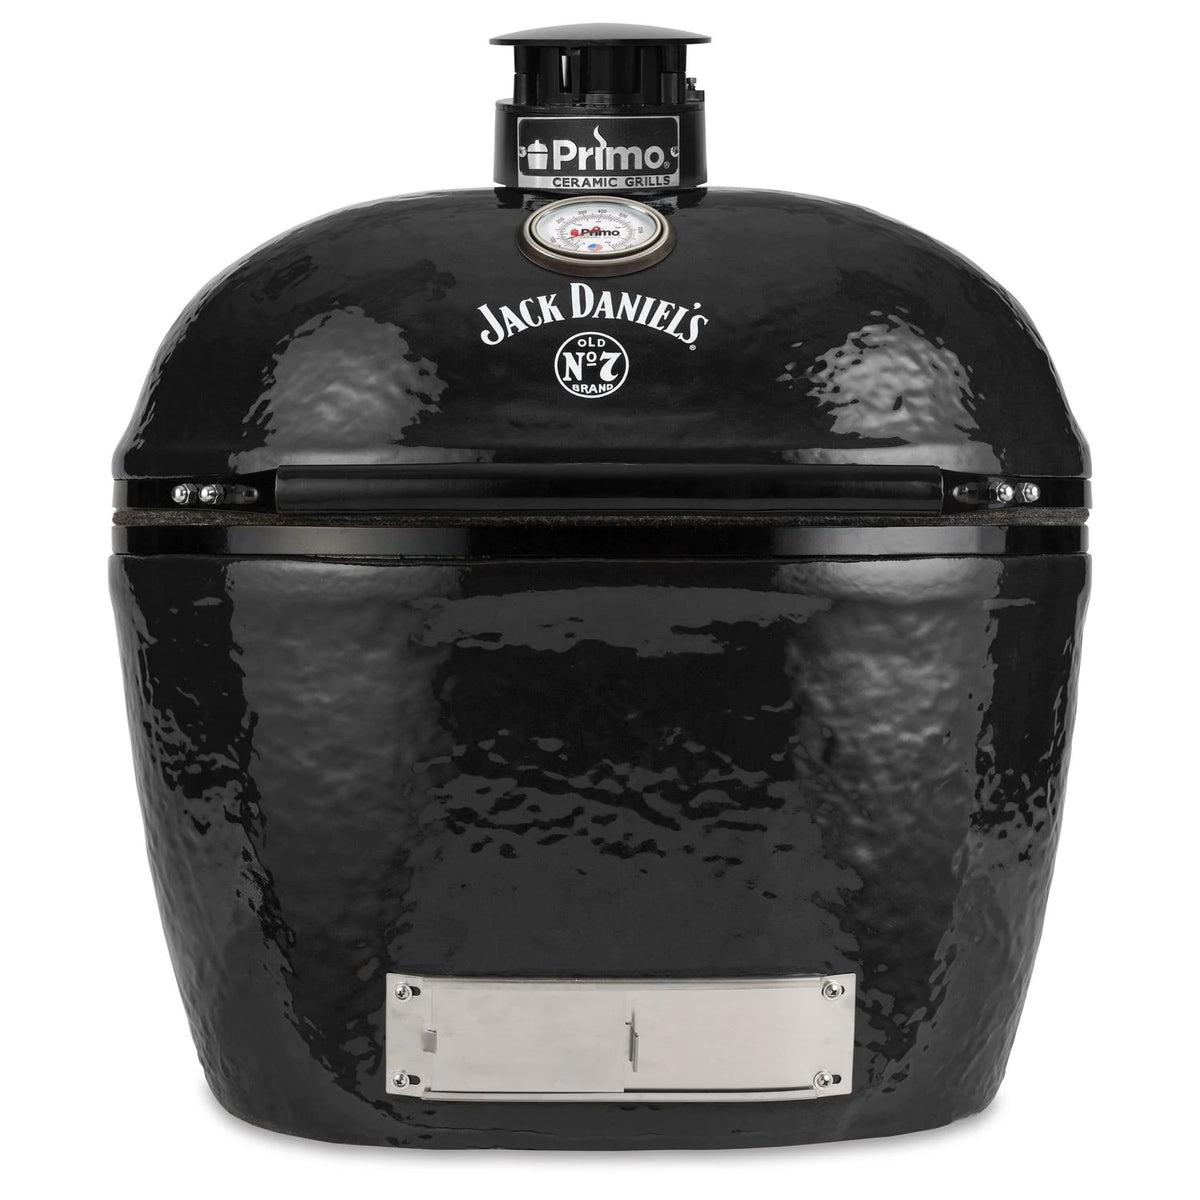 Primo Jack Daniels Edition Oval XL 400 Ceramic Kamado Grill With Stainless Steel Grates - PGCXLHJ (2021) - Room By The Tree 